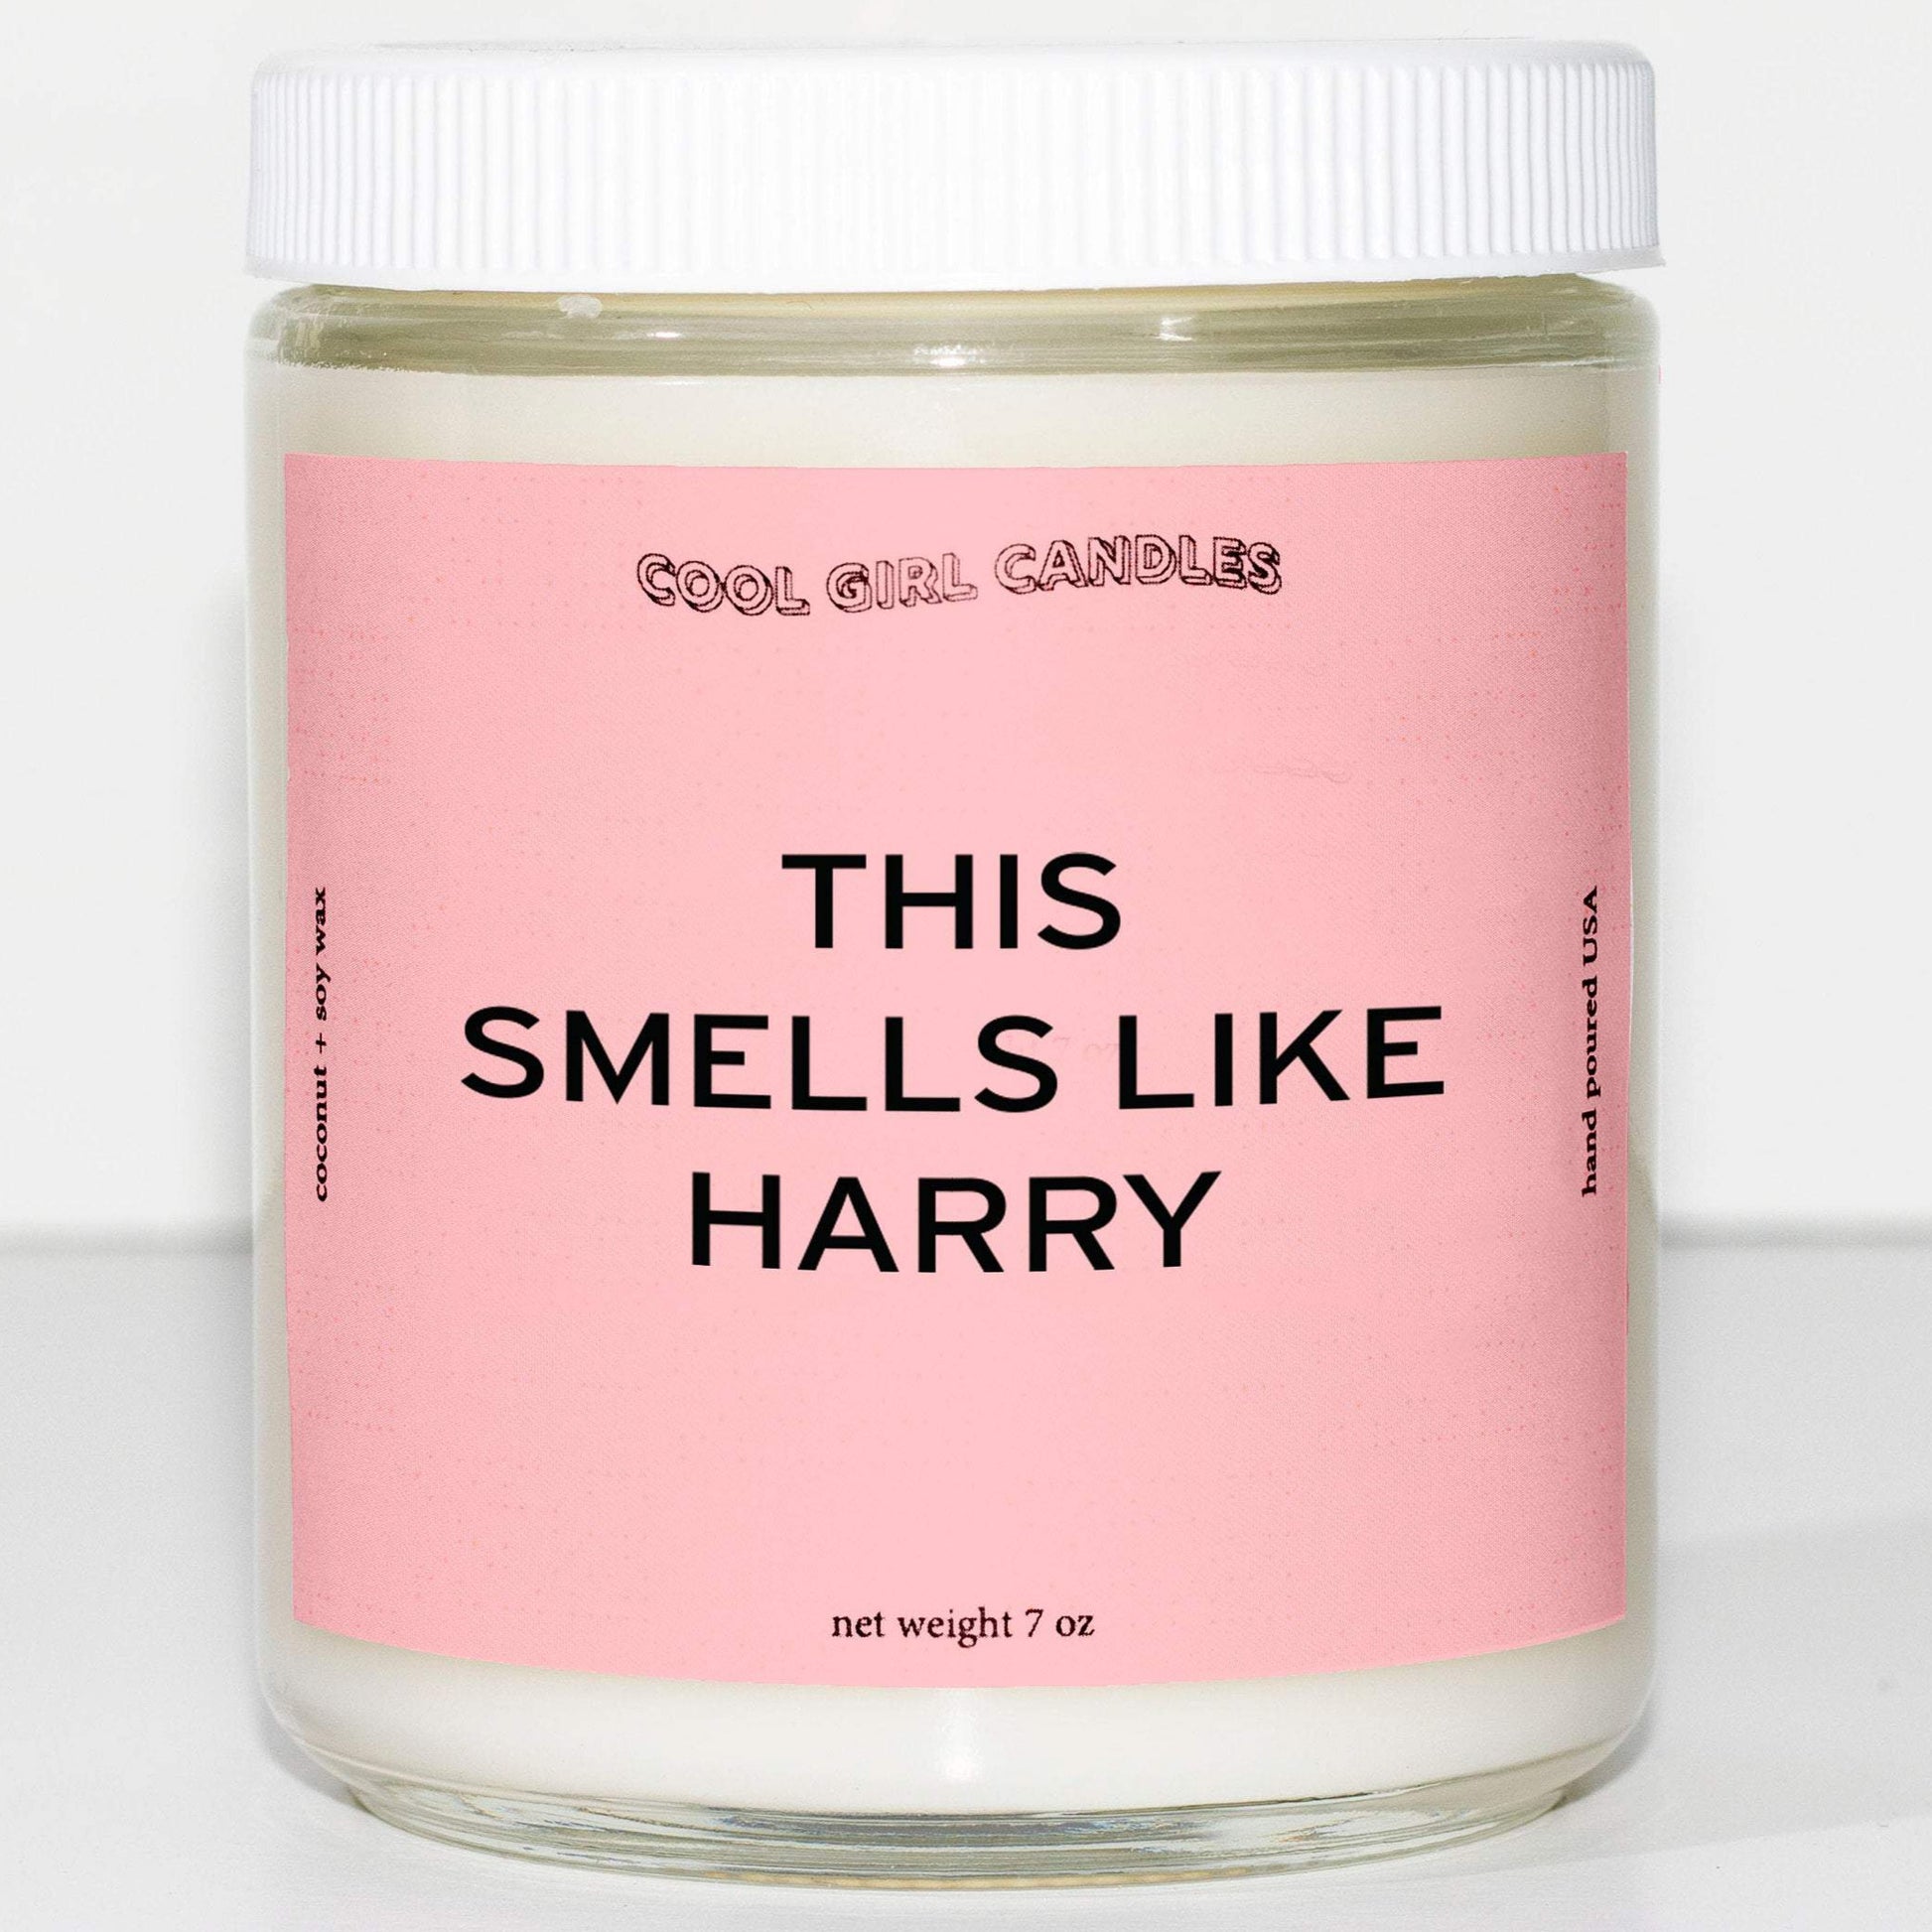 this smells like harry potter candle cute harry potter candles that smell like harry potter cute aesthetic candle coconut soy wax